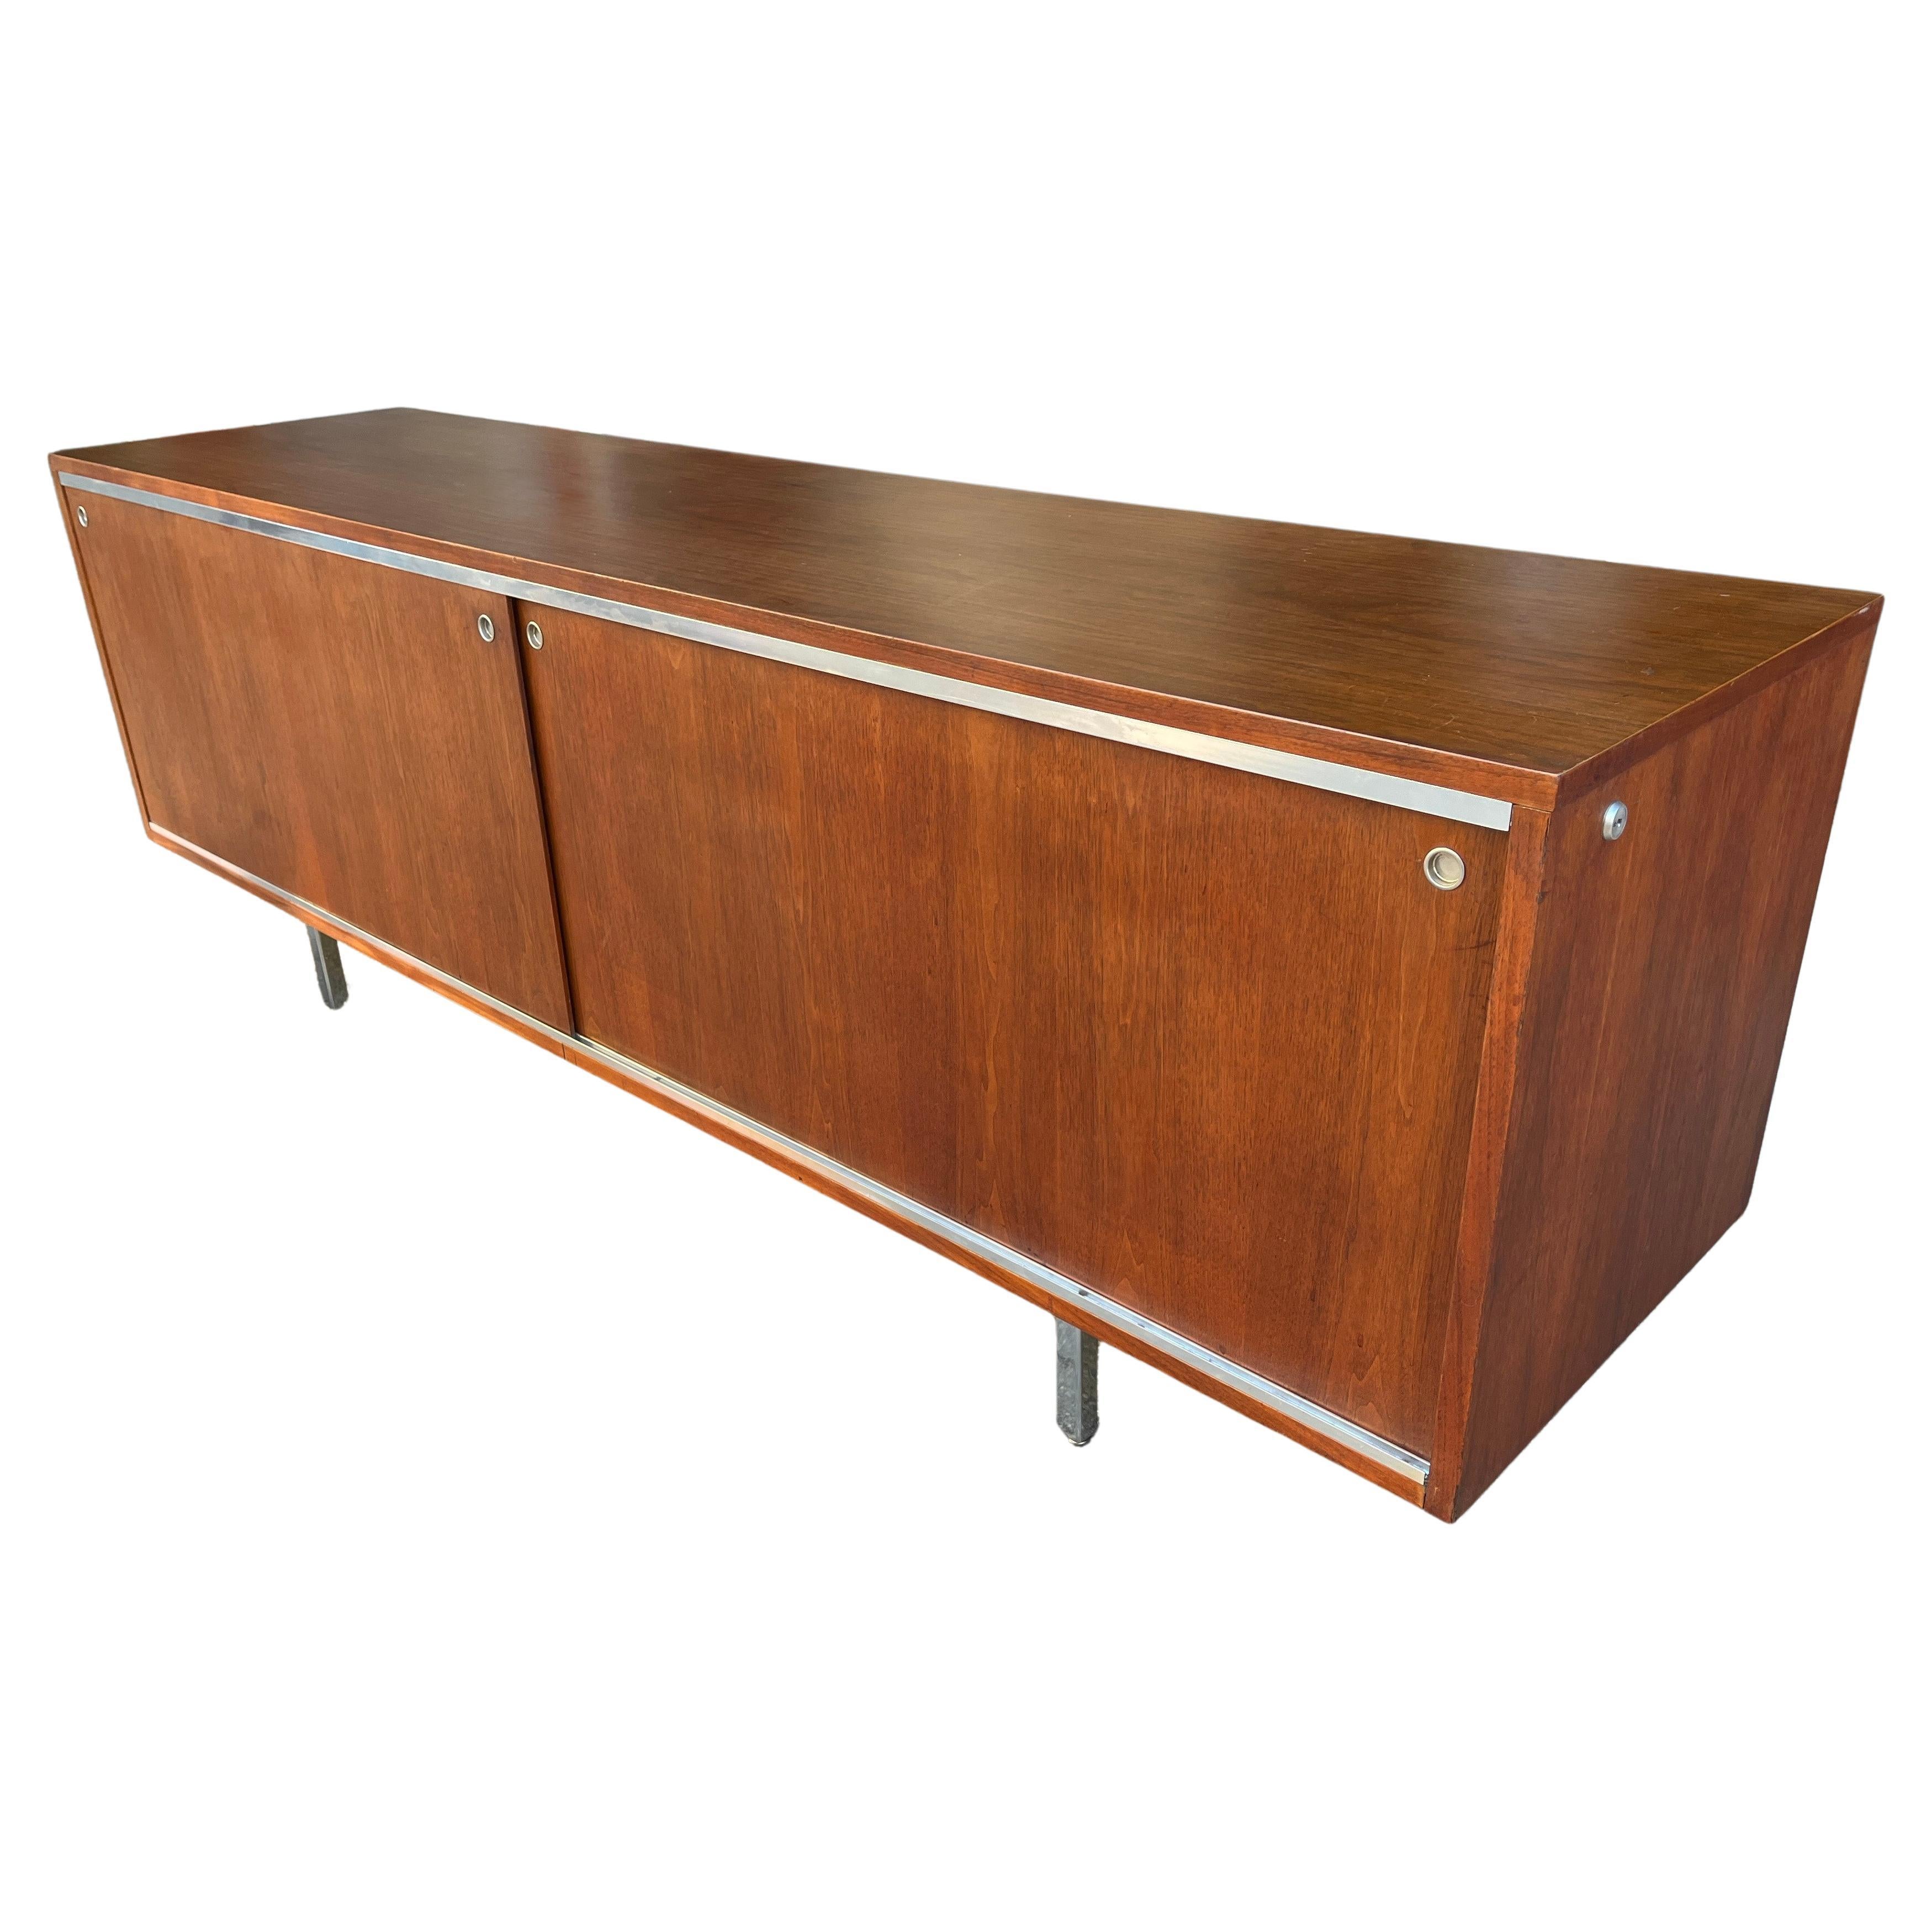 Wonderful low cabinet by Herman Miller designed by George Nelson. This beautiful brown walnut long low credenza features 2x front original walnut sliding doors with 4 sections inside and (1) adjustable shelf in each side, one file cabinet, and one